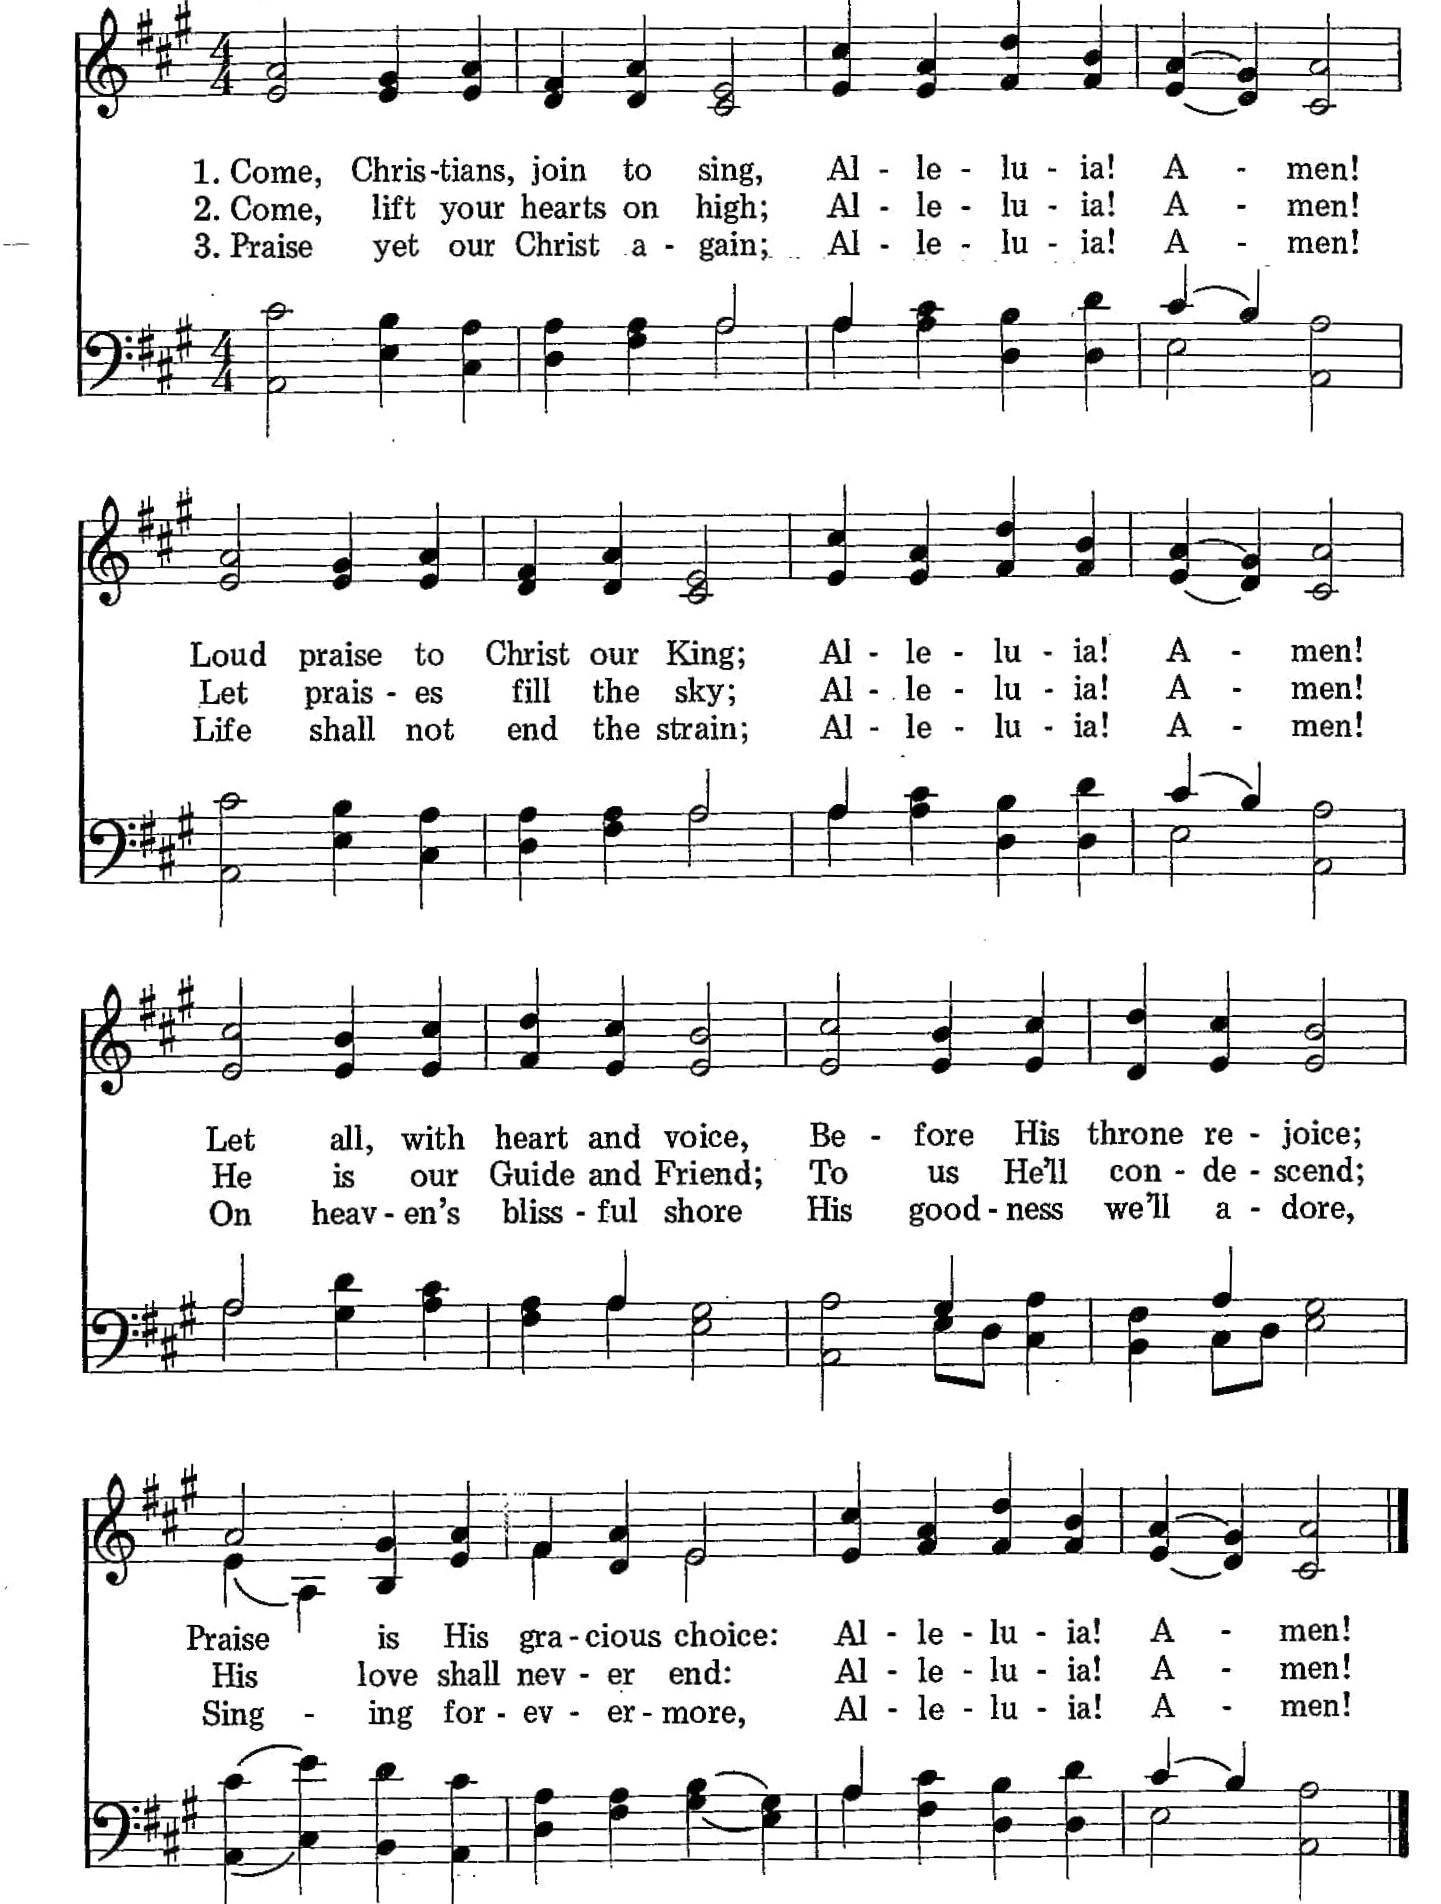 010 – Come, Christians, Join to Sing sheet music